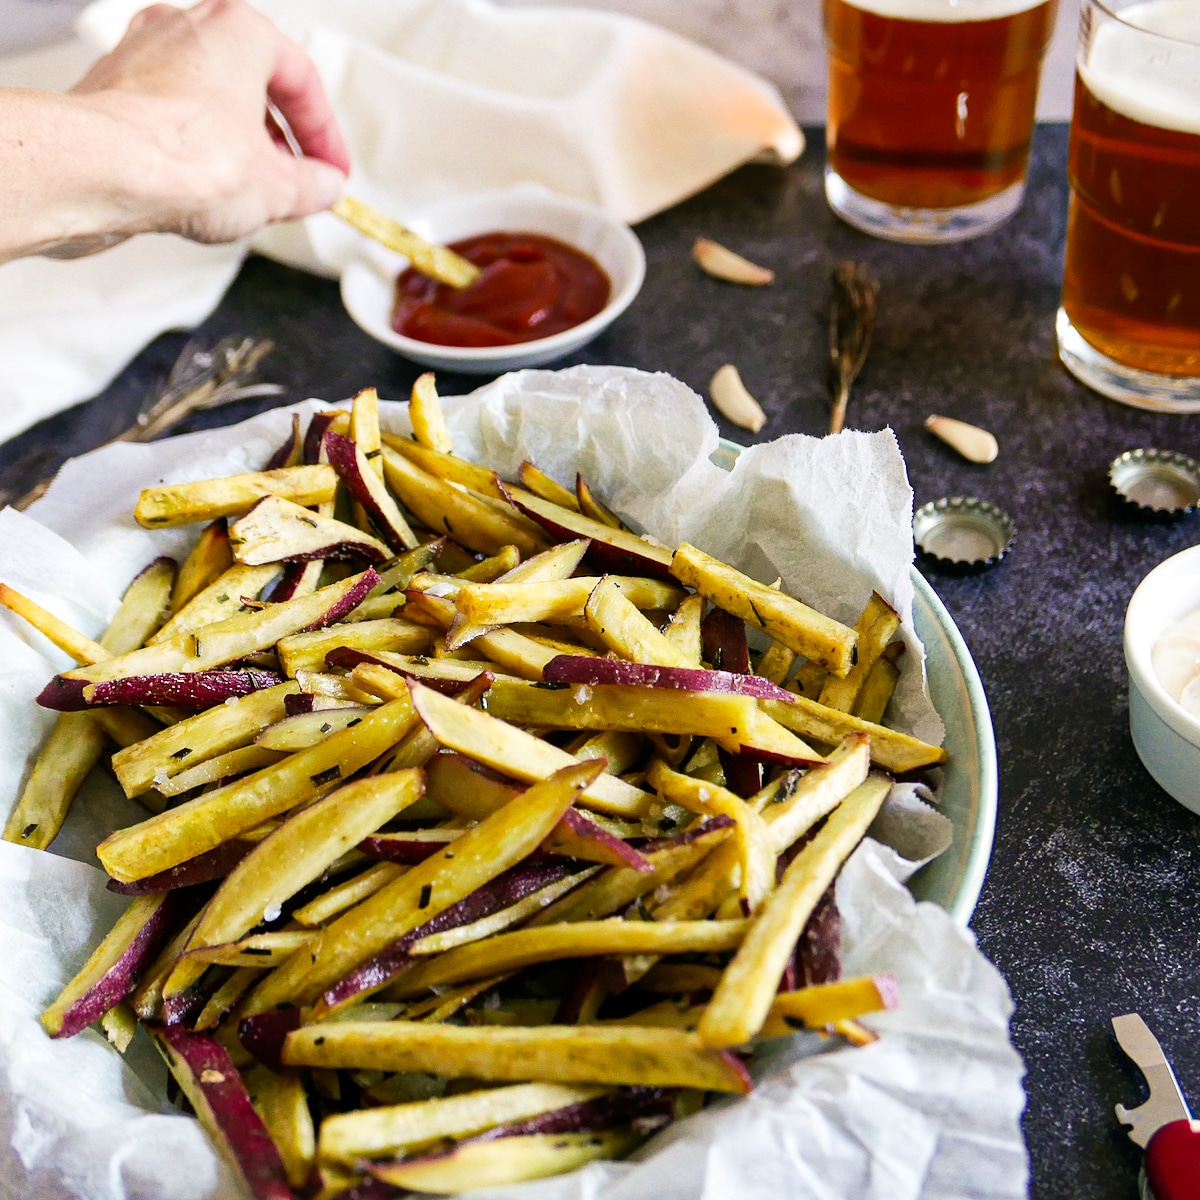 Hand dipping fries into ketchup with two glasses of beer in the background.